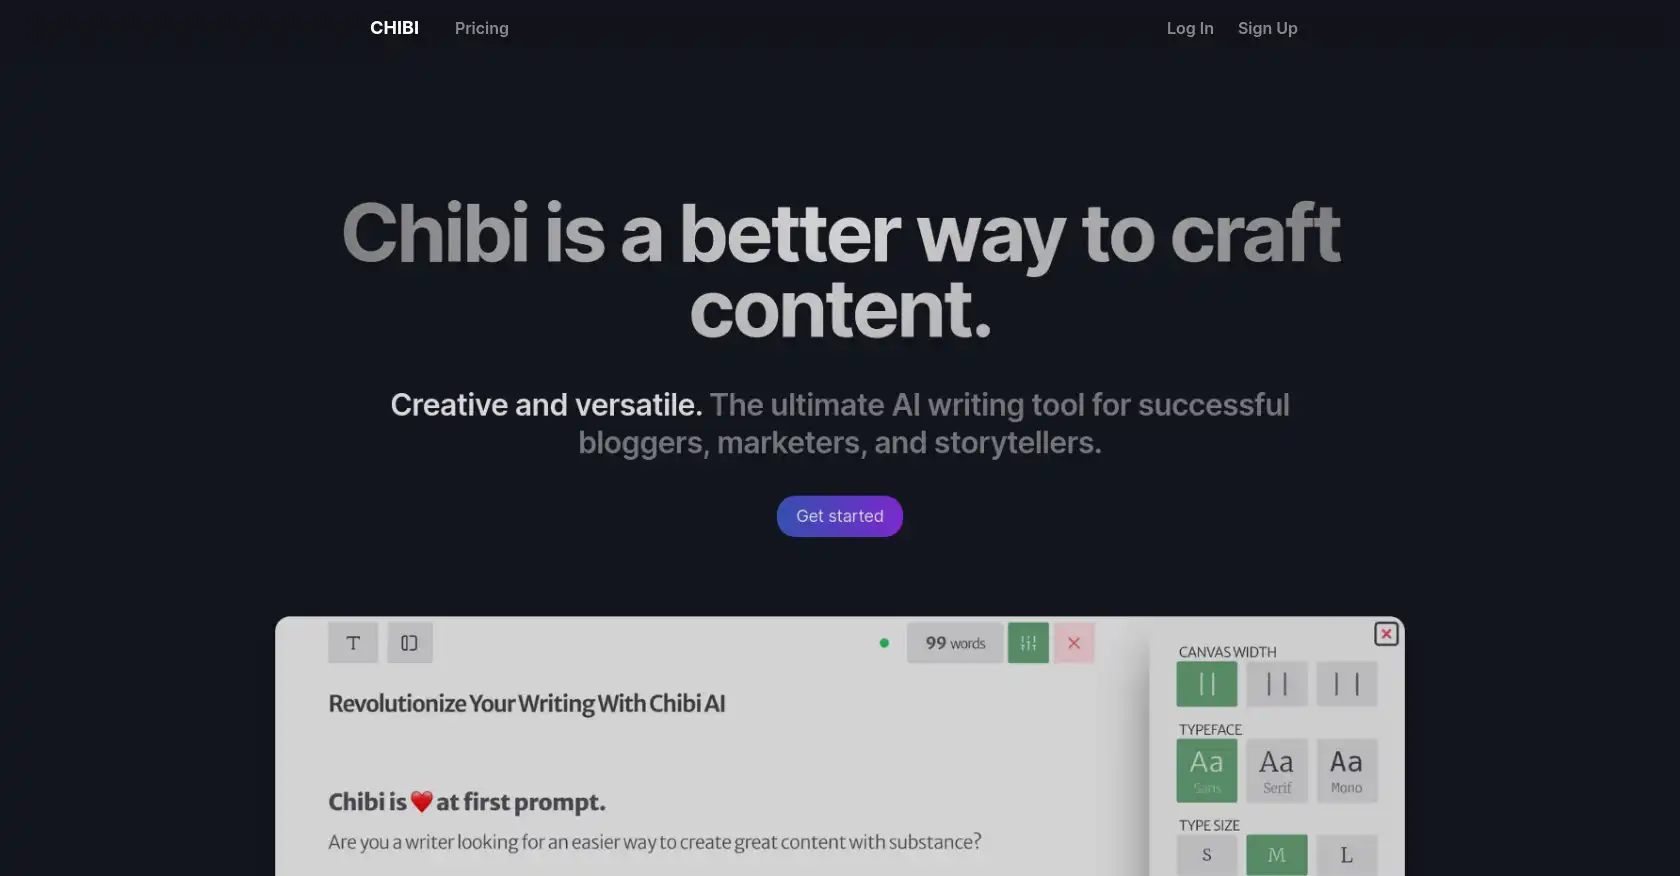 Chibi - AI tool for Content Creation, Writing, Text analysis, Inline editing